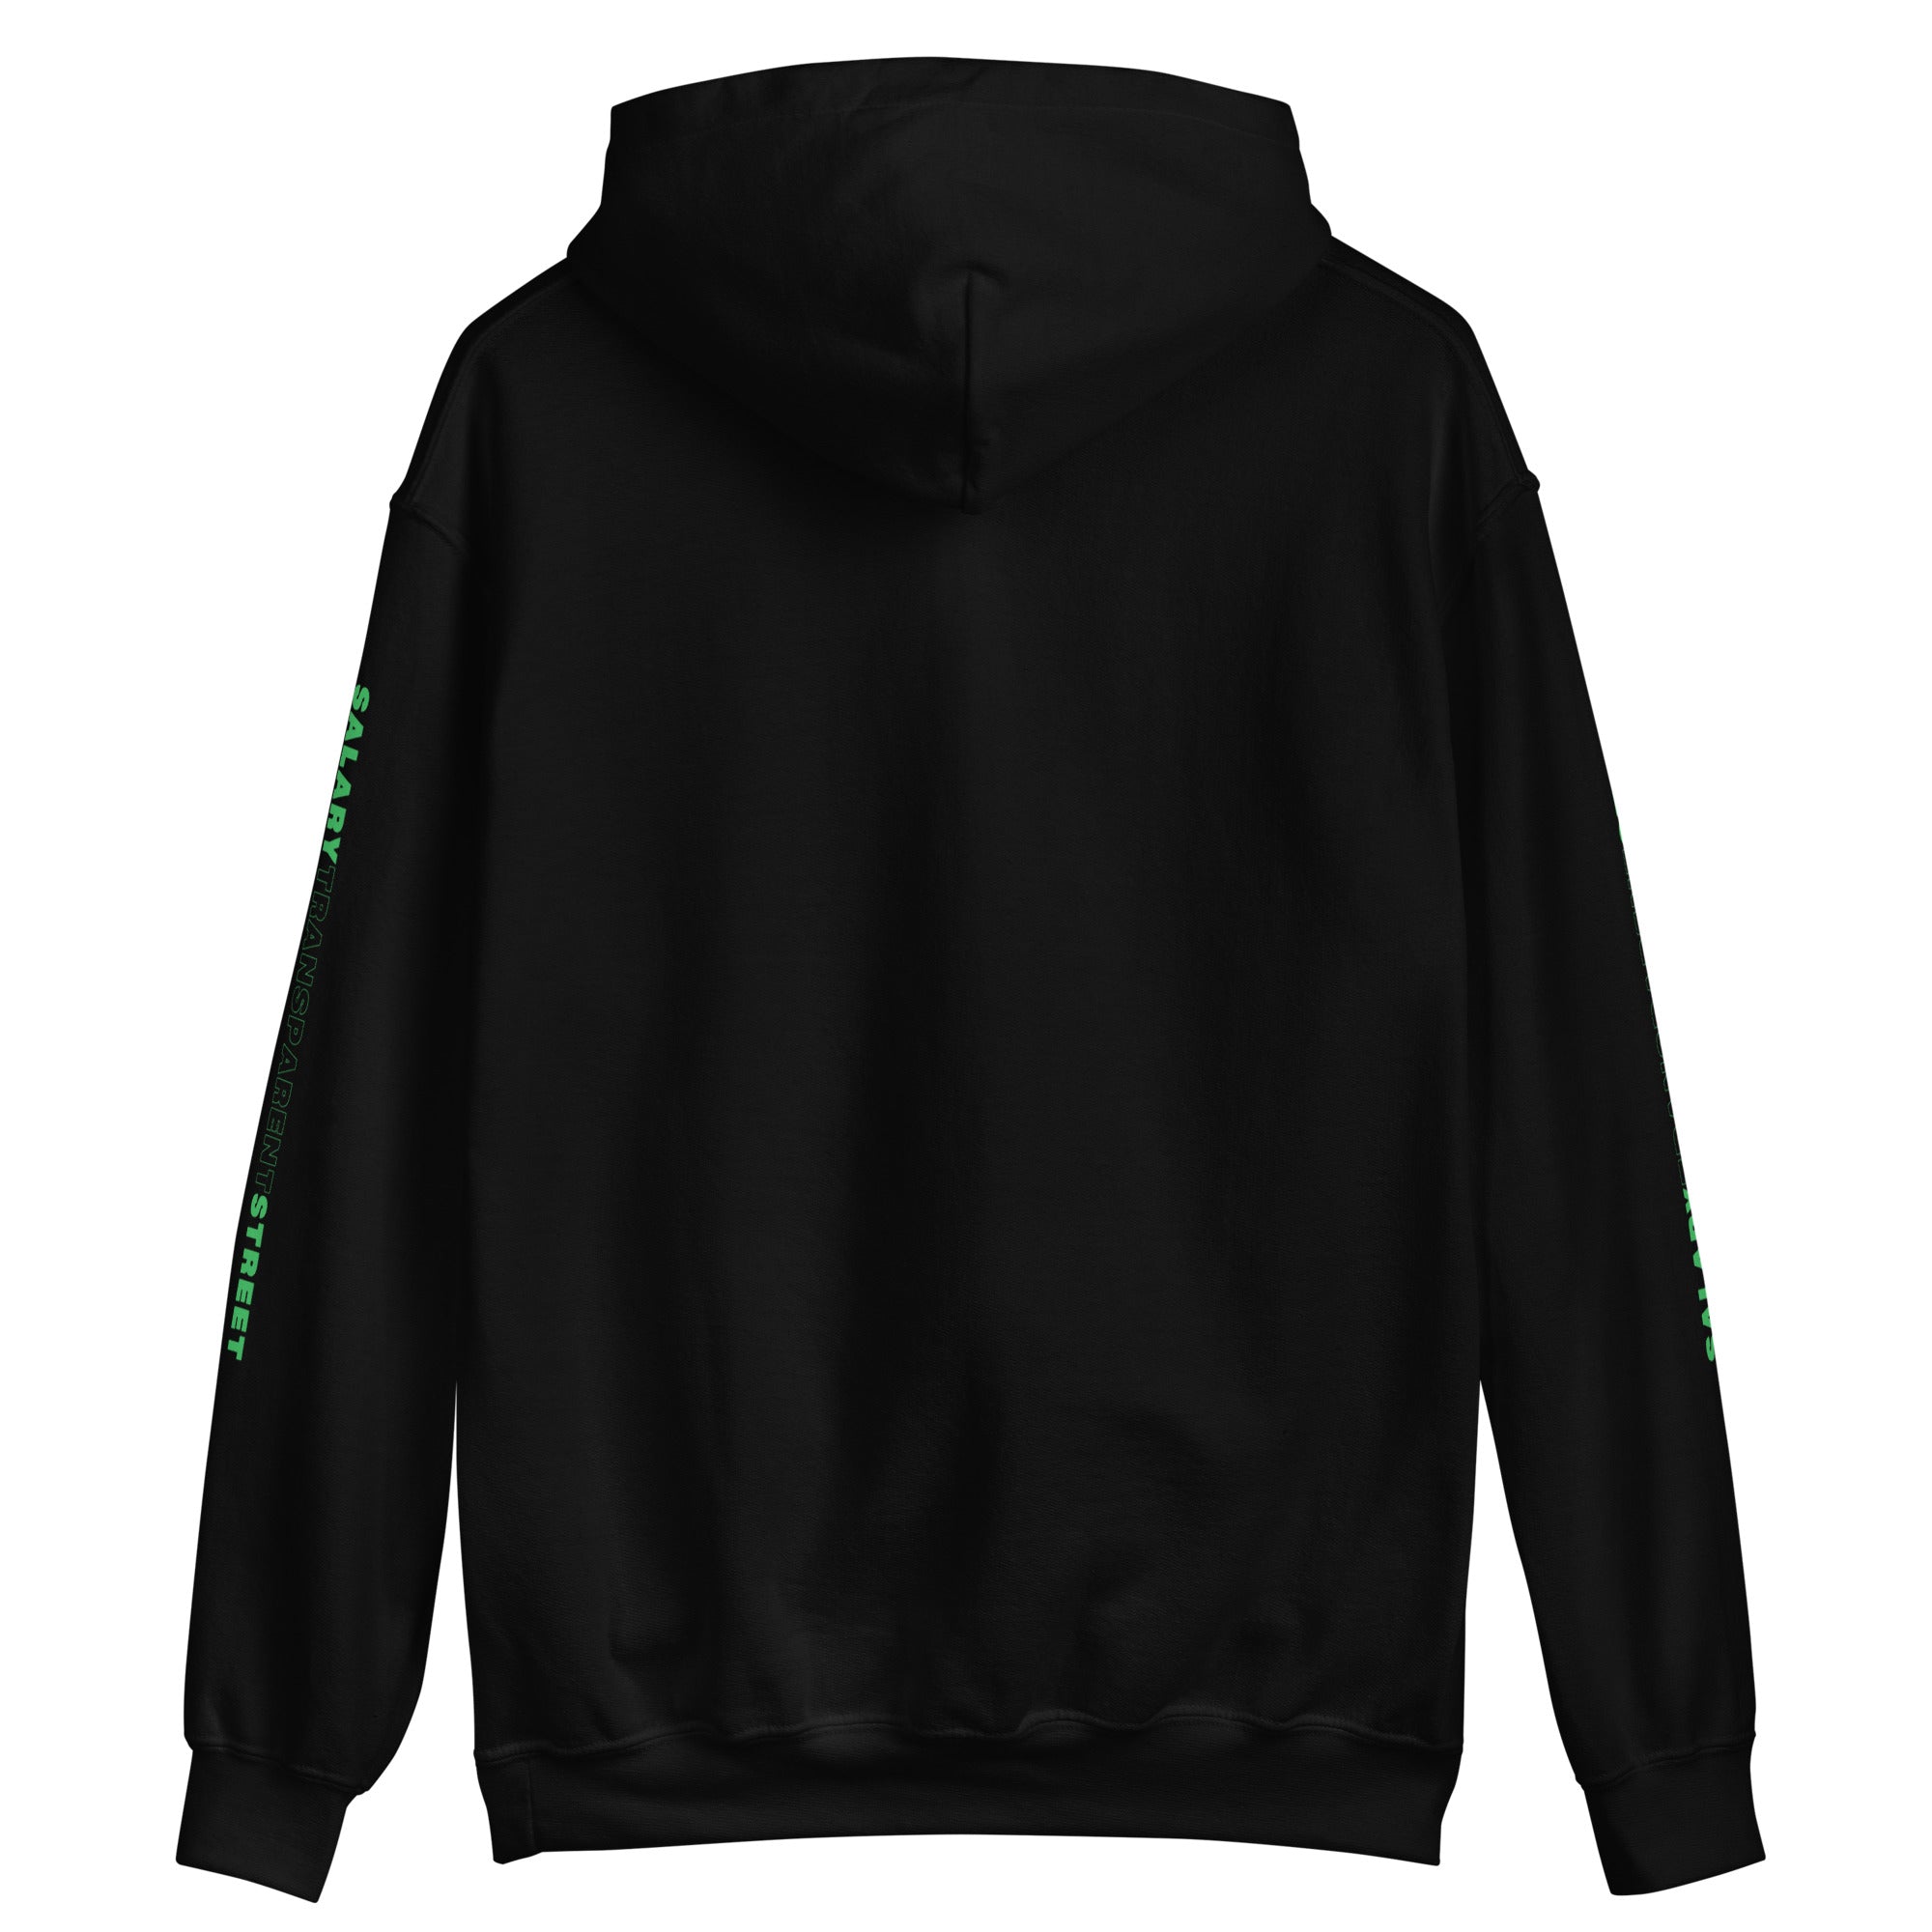 End the Paytriarchy Hoodie